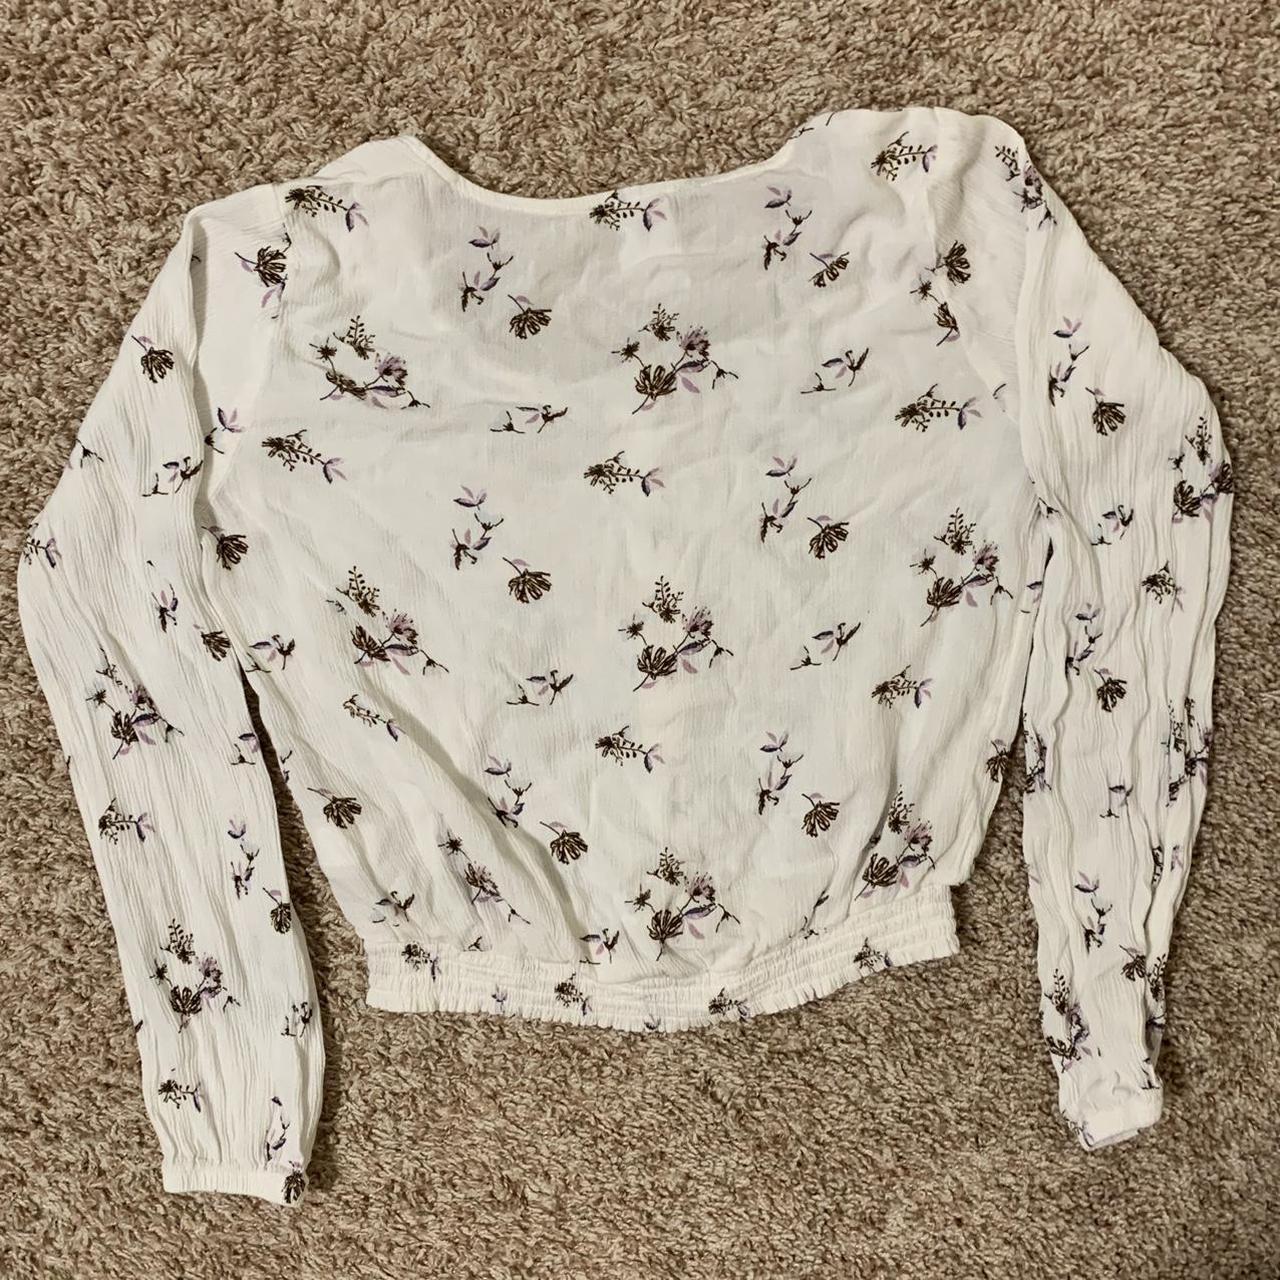 Product Image 2 - 🌻Floral design blouse🌼

-Size XS or